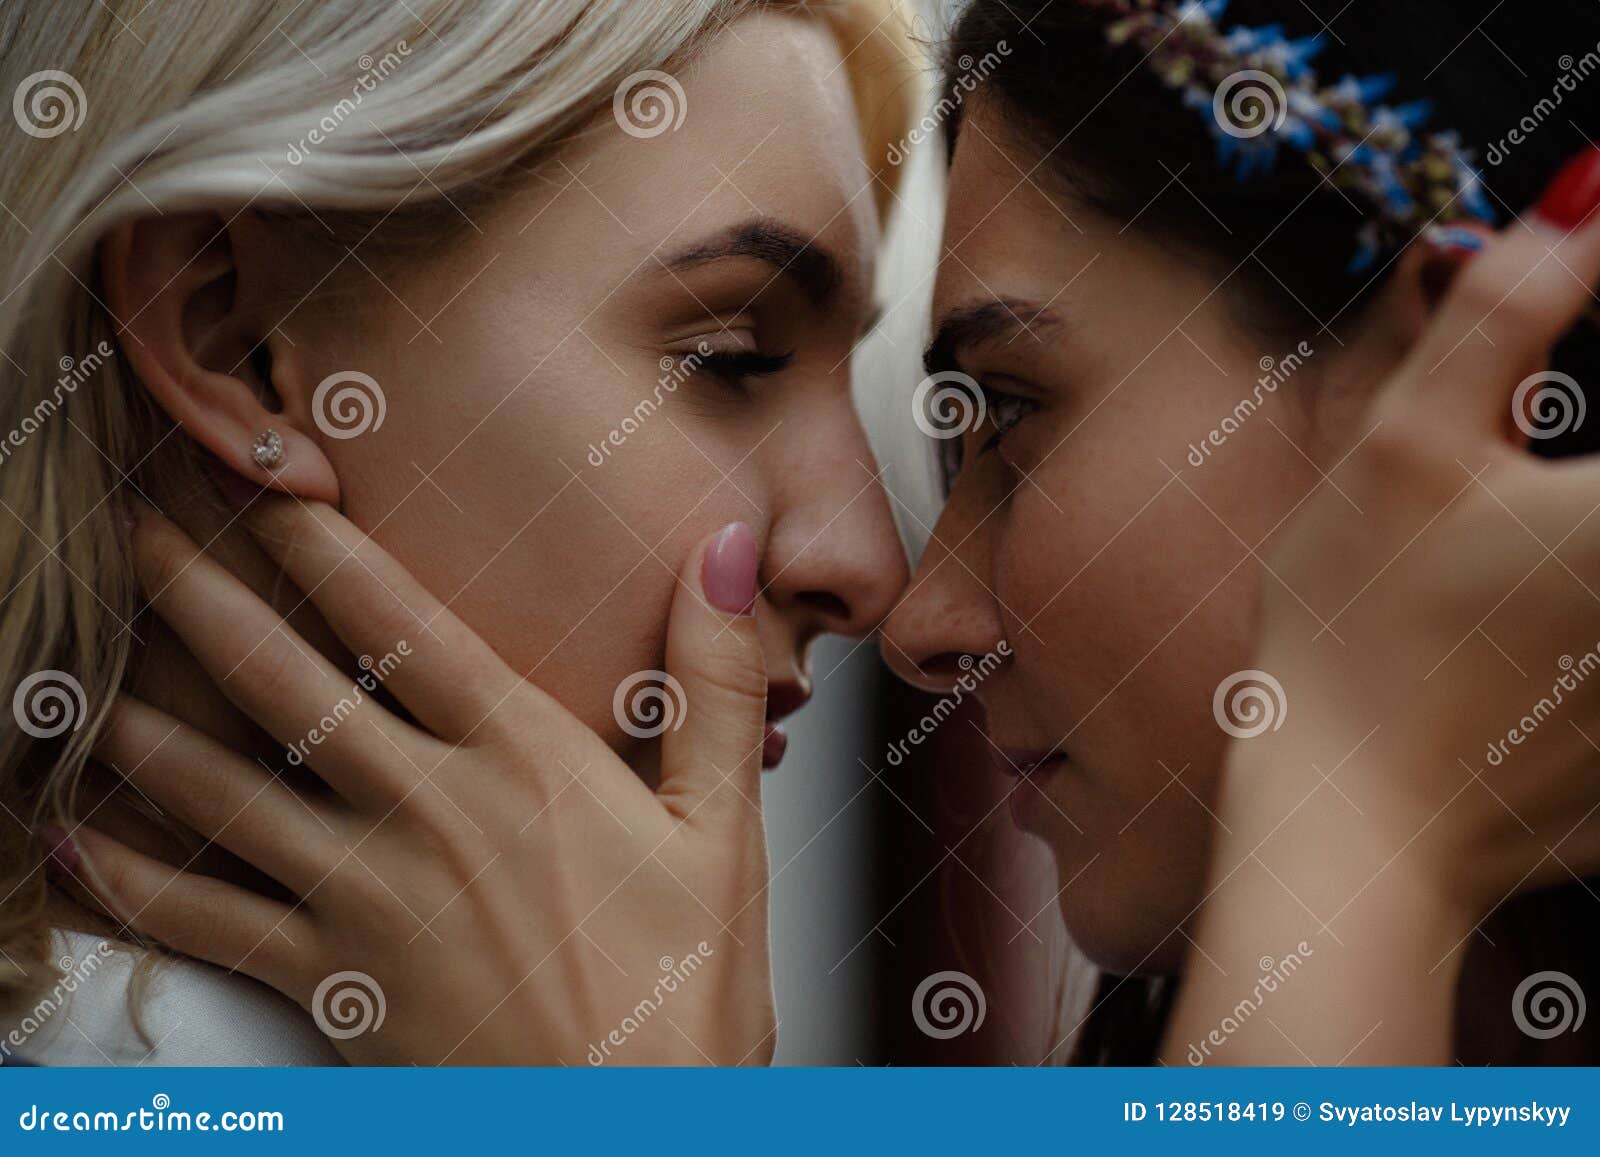 Happy Positive Attractive Lesbian Couple Stock Image image photo pic